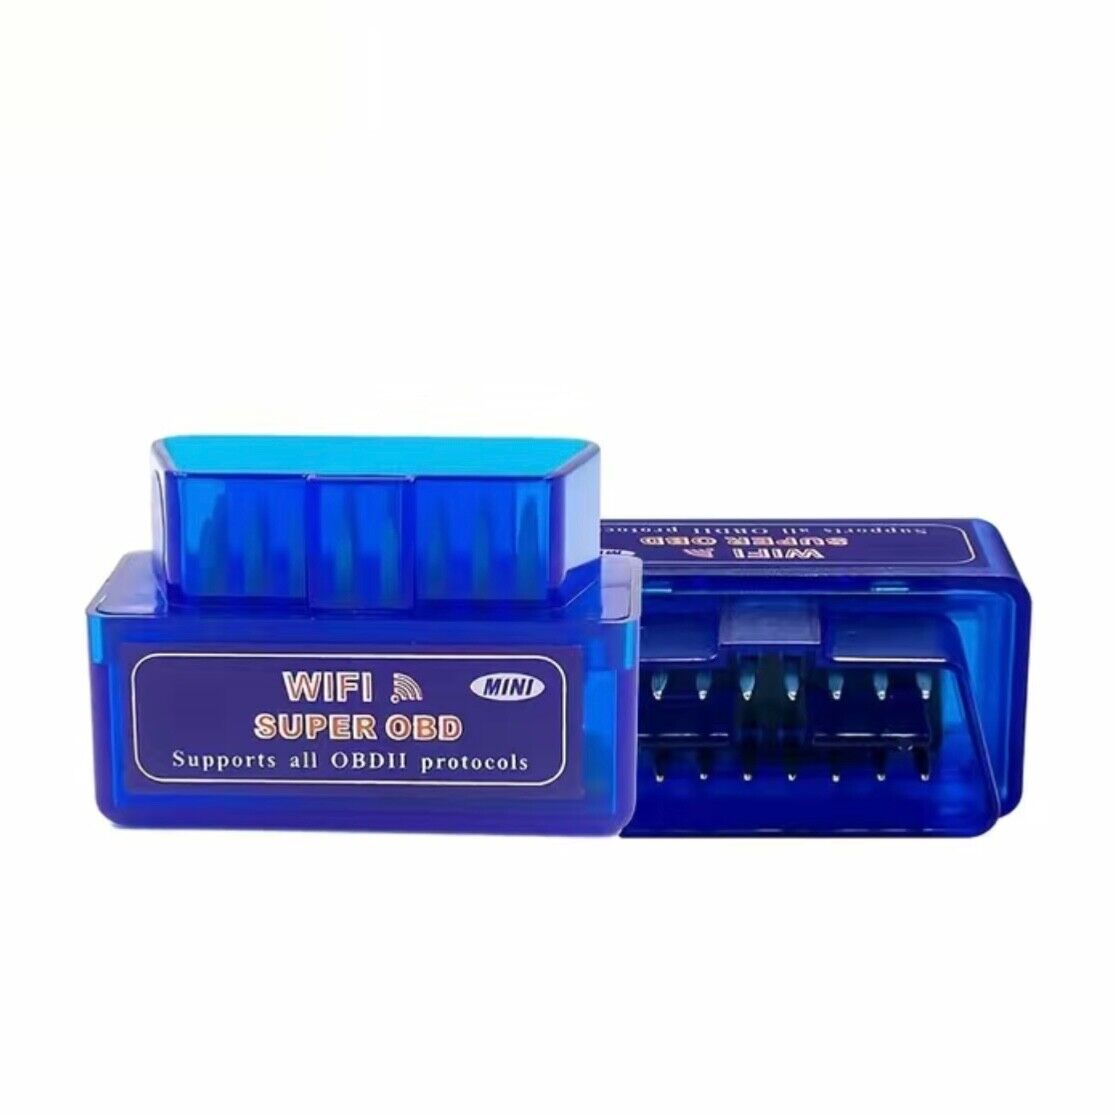 Vehicle ELM327 WiFi OBD2 Scan Tool OBD Code Reader For Apple iPhone Android